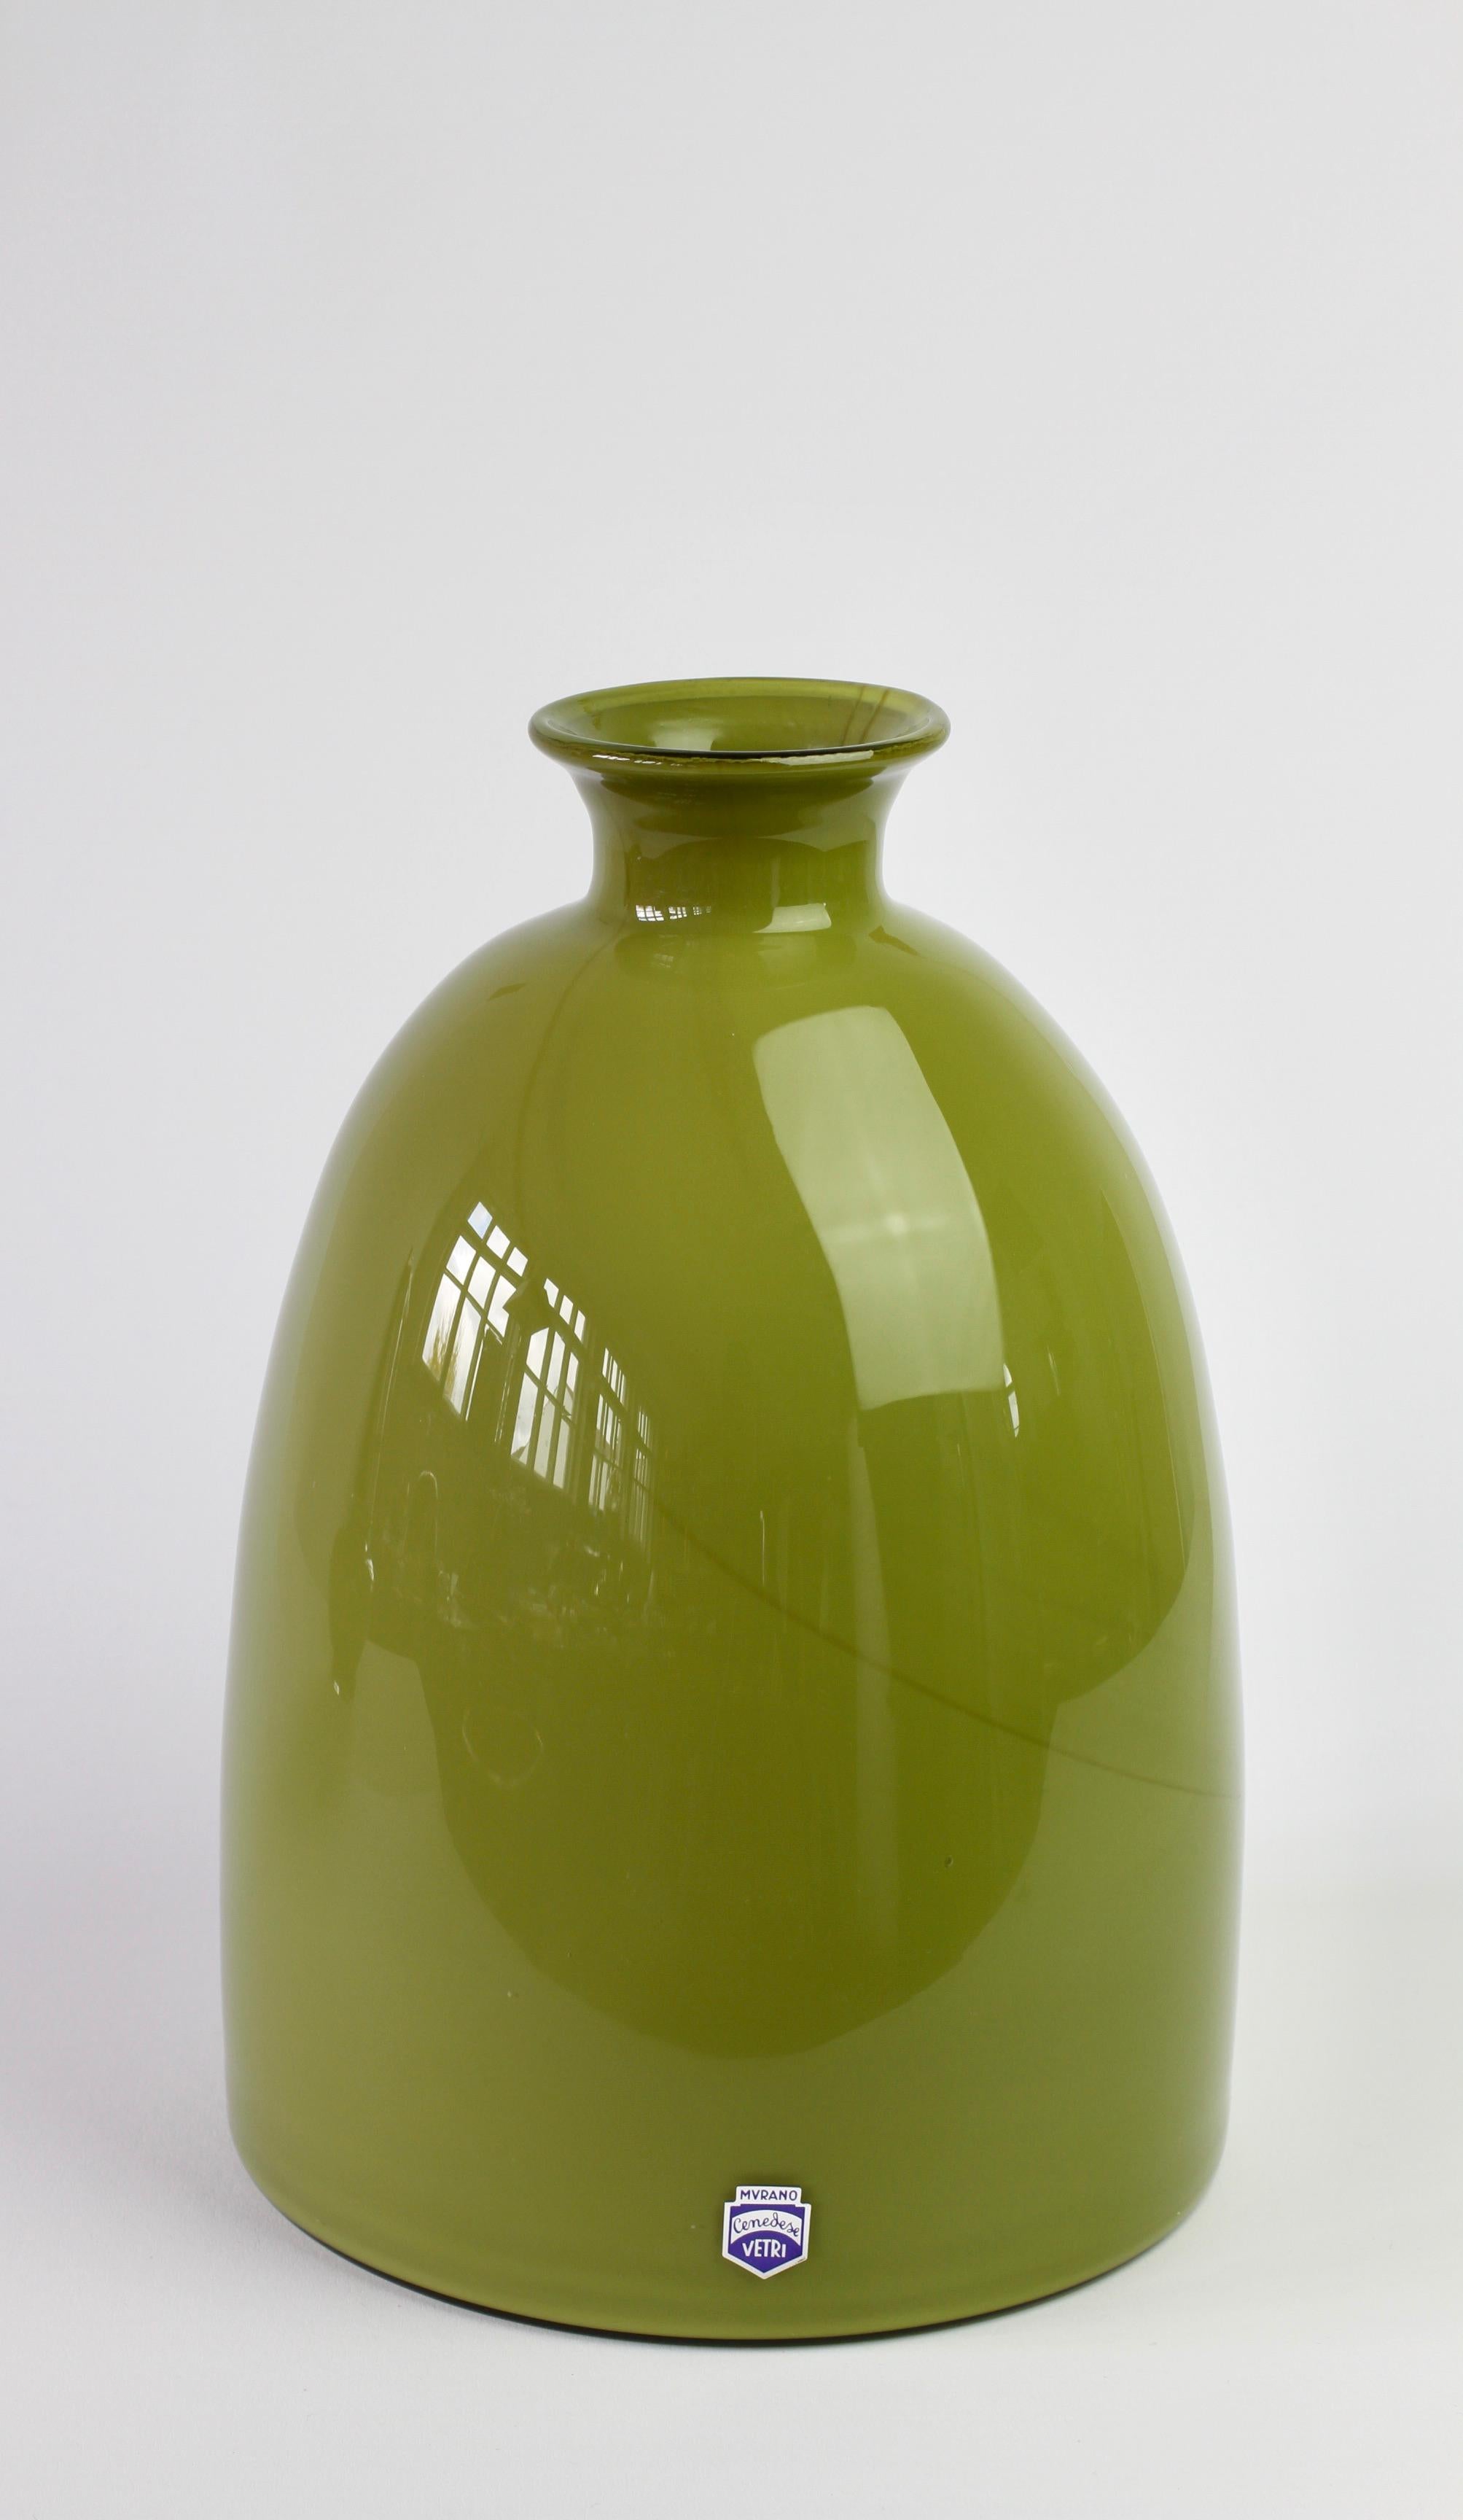 Apple or moss green Cenedese vintage Italian midcentury Murano glass vase or vessel, made in Italy, circa 1970-1990. Particularly striking is the form as it has the characteristics of hand thrown pottery with the unmistakable look and feel of